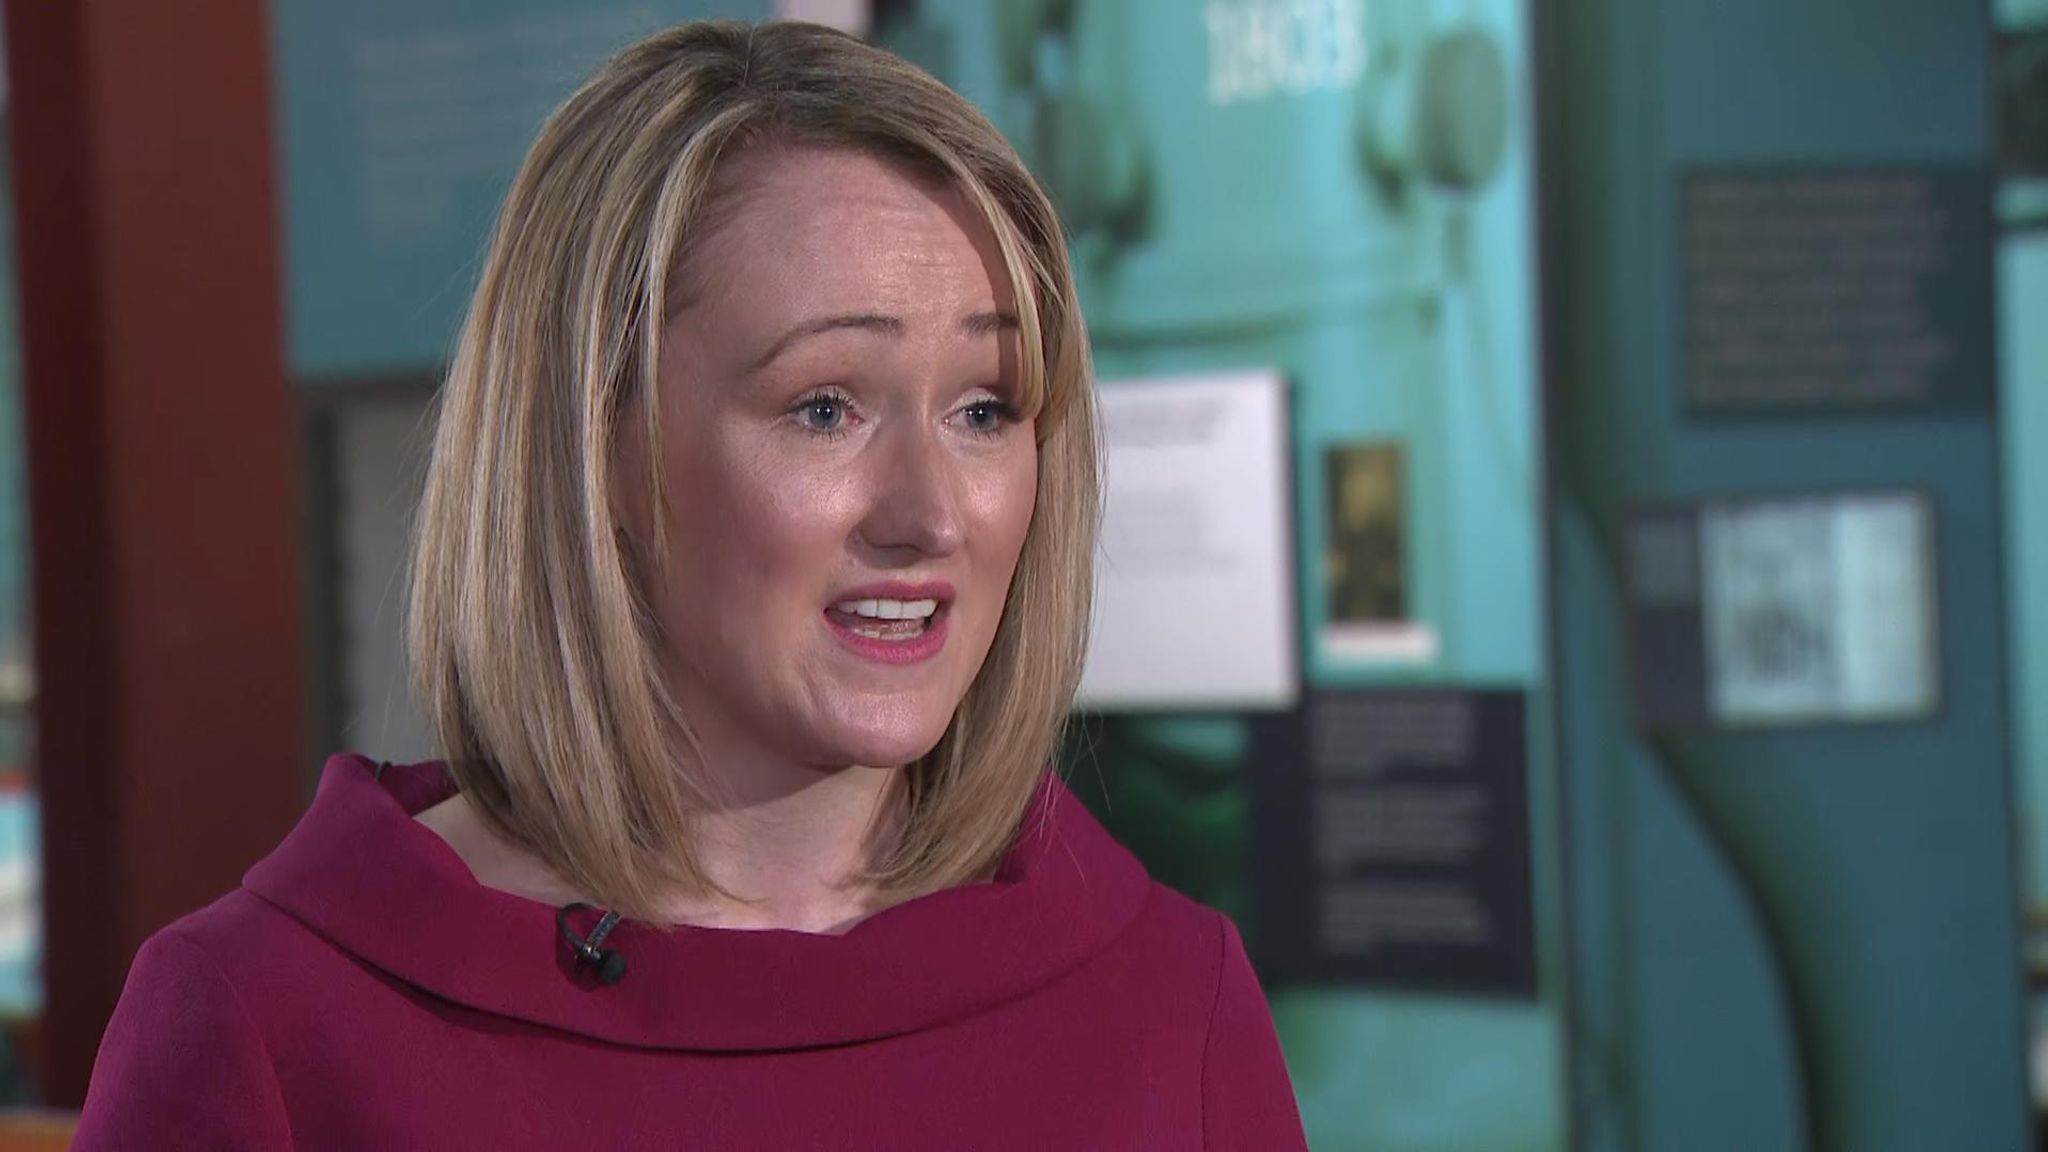 Labour Leadership Rebecca Long Bailey Says She Can Reach Parts Of 